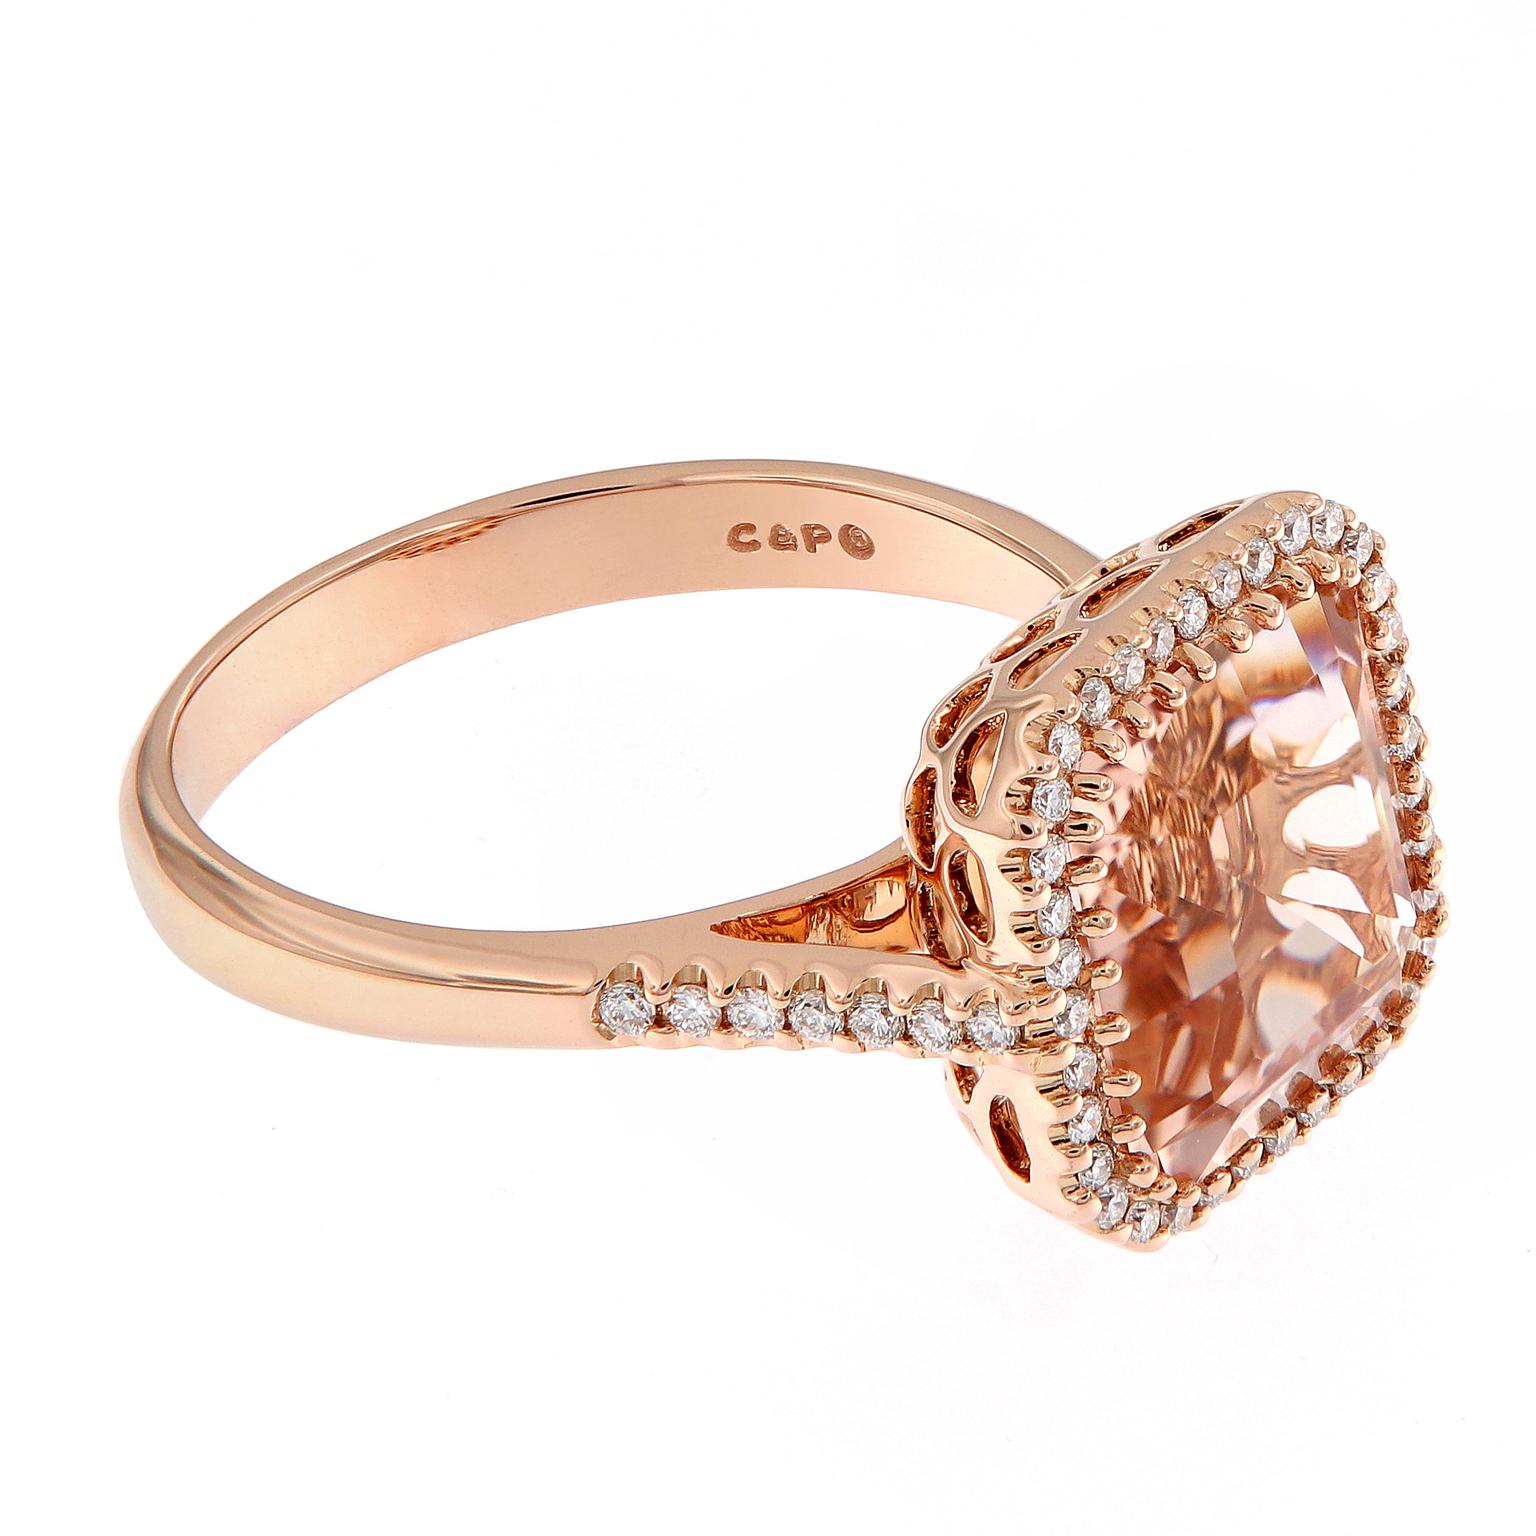 Beautiful 18k rose gold cocktail ring centers around a 3.79 carat morganite, surrounded with a halo of diamonds and beautifully balanced with diamonds running down the shank. Ring Size 7. 

Morganite 3.79 ct
Diamonds 0.26 cttw